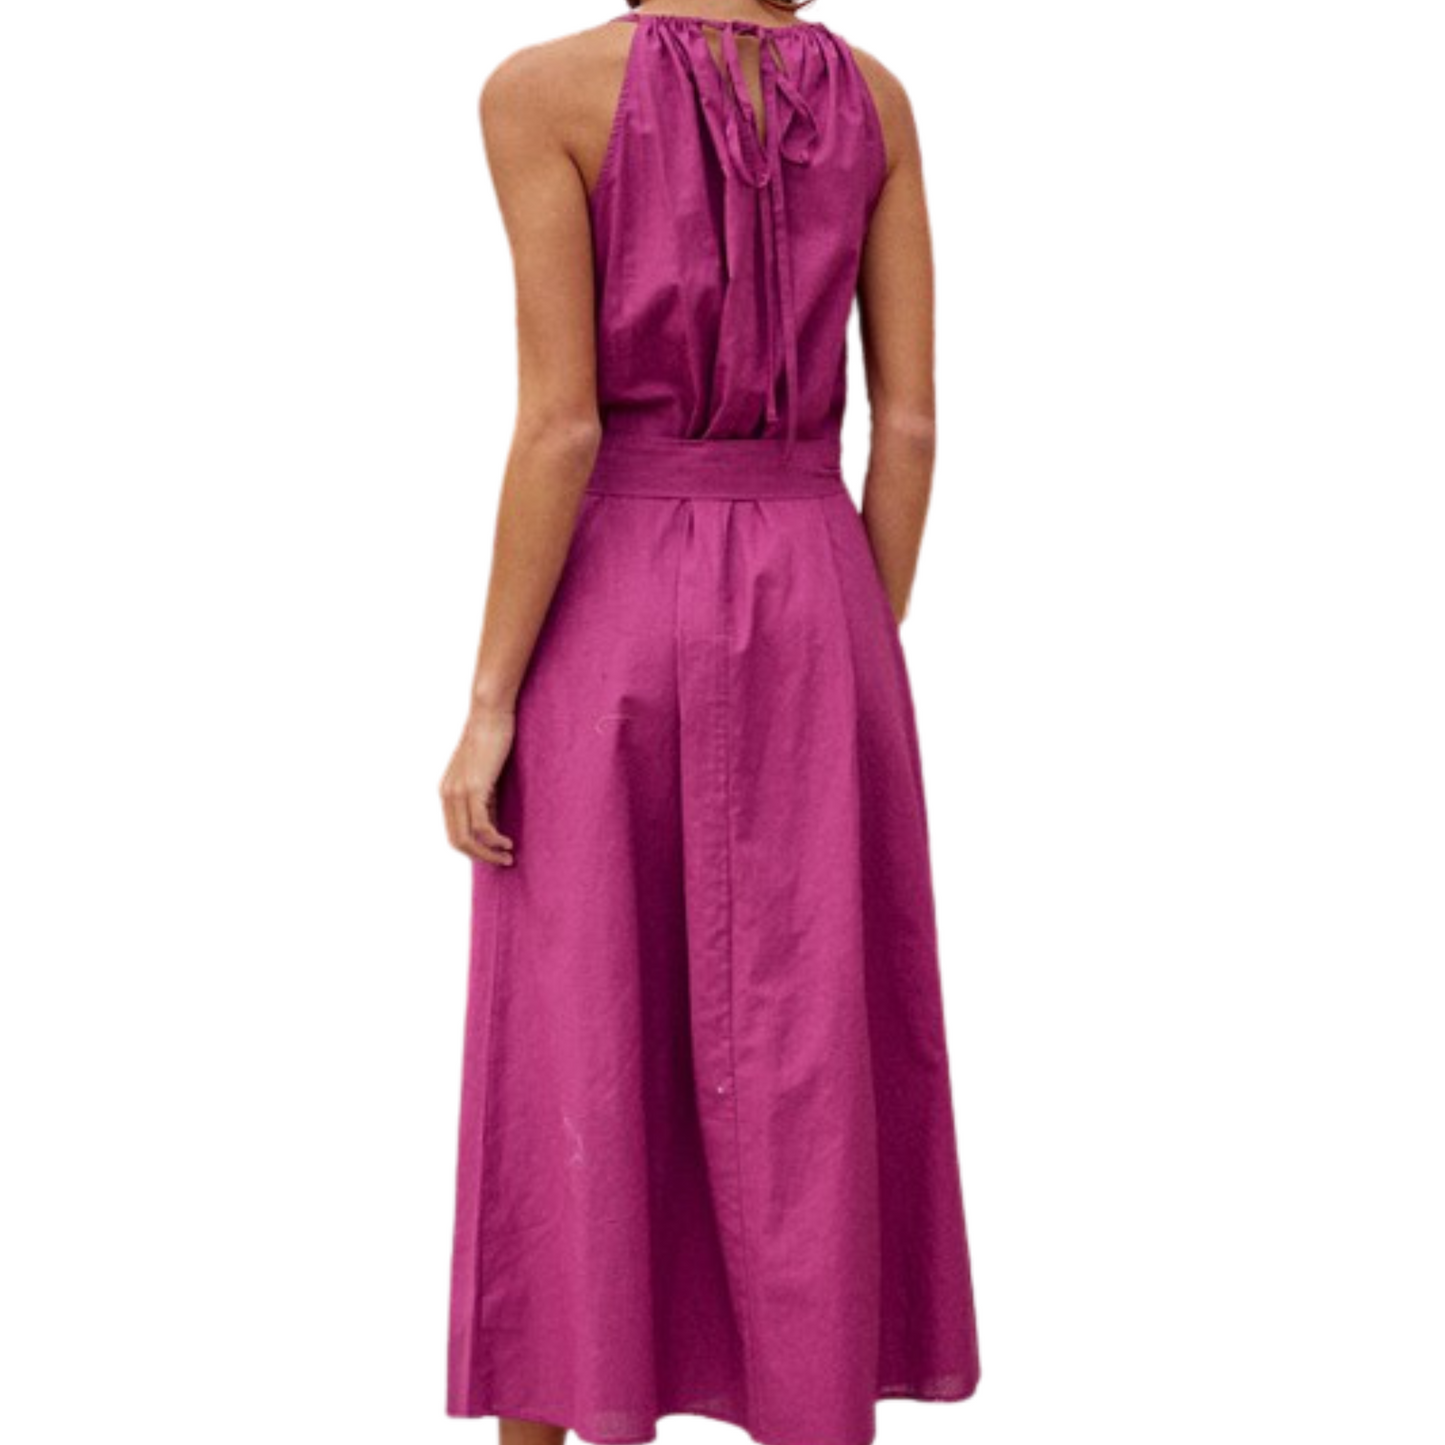 Deep purple maxi dress with halter neckline, pockets and tie, worn by a woman from the back.